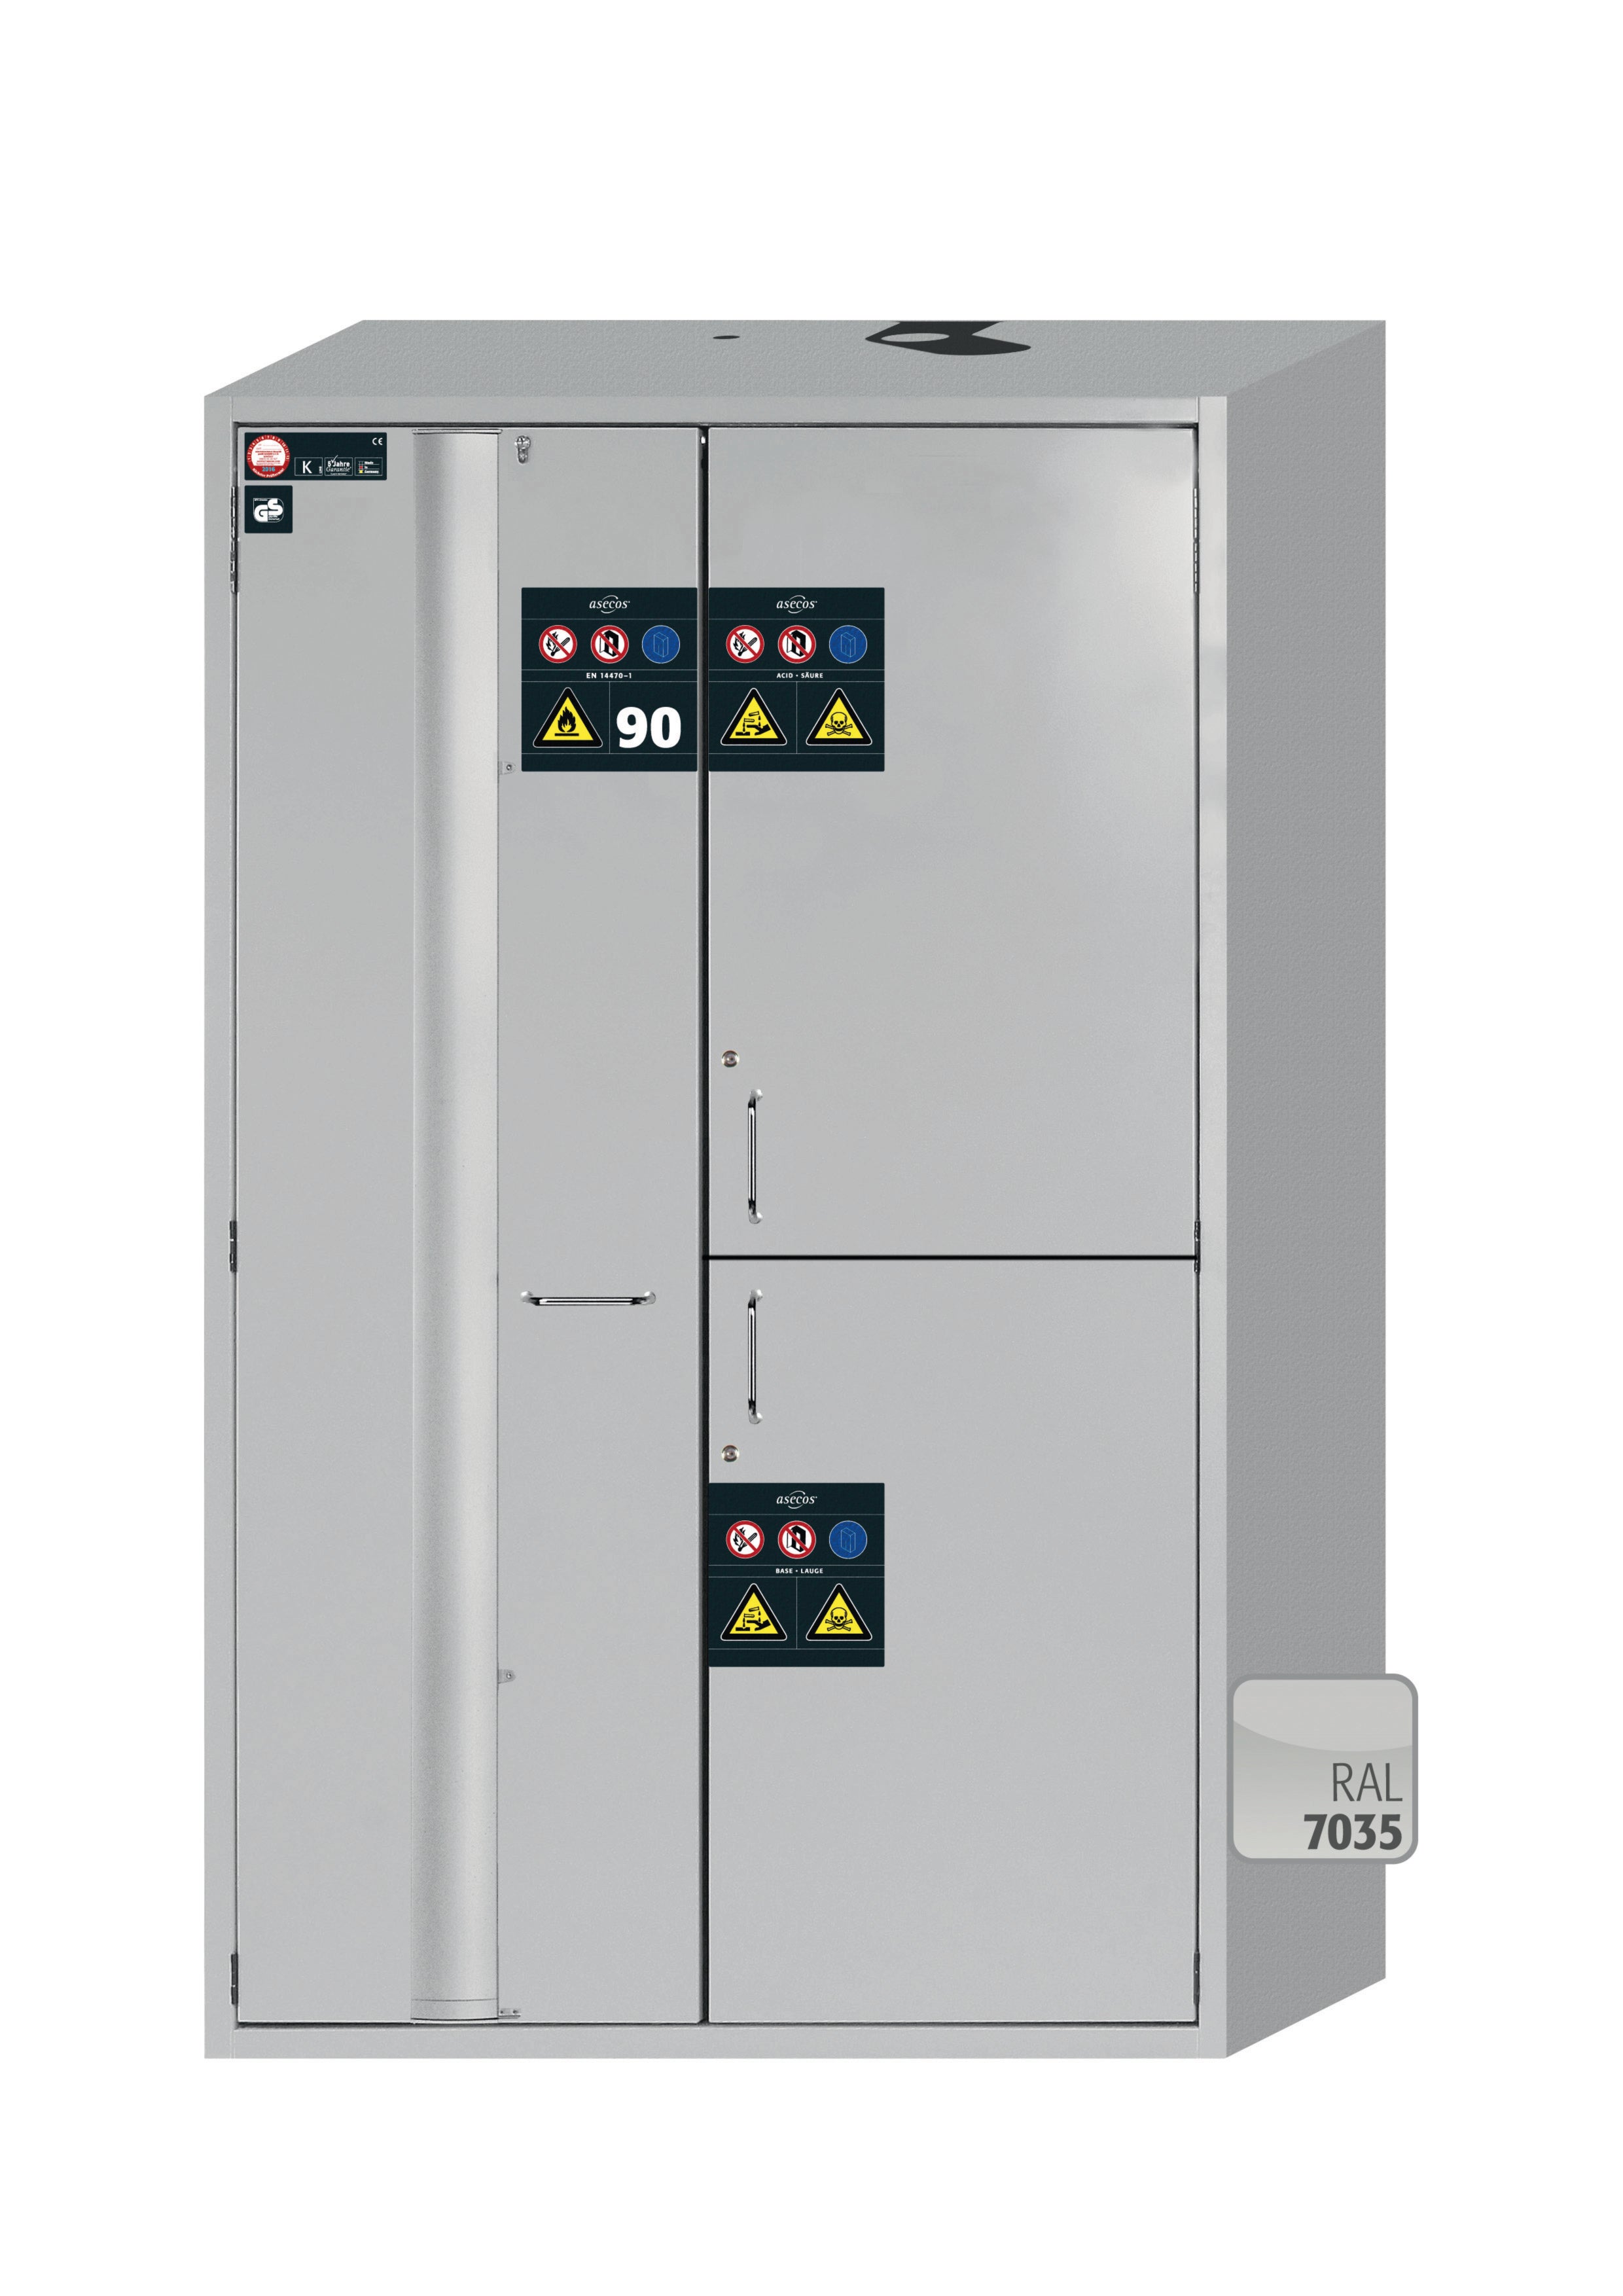 Type 90 combination safety cabinet K-PHOENIX Vol.2-90 model K90.196.120.MC.FWAC in light gray RAL 7035 with 4x standard pull-out tray (stainless steel 1.4301)